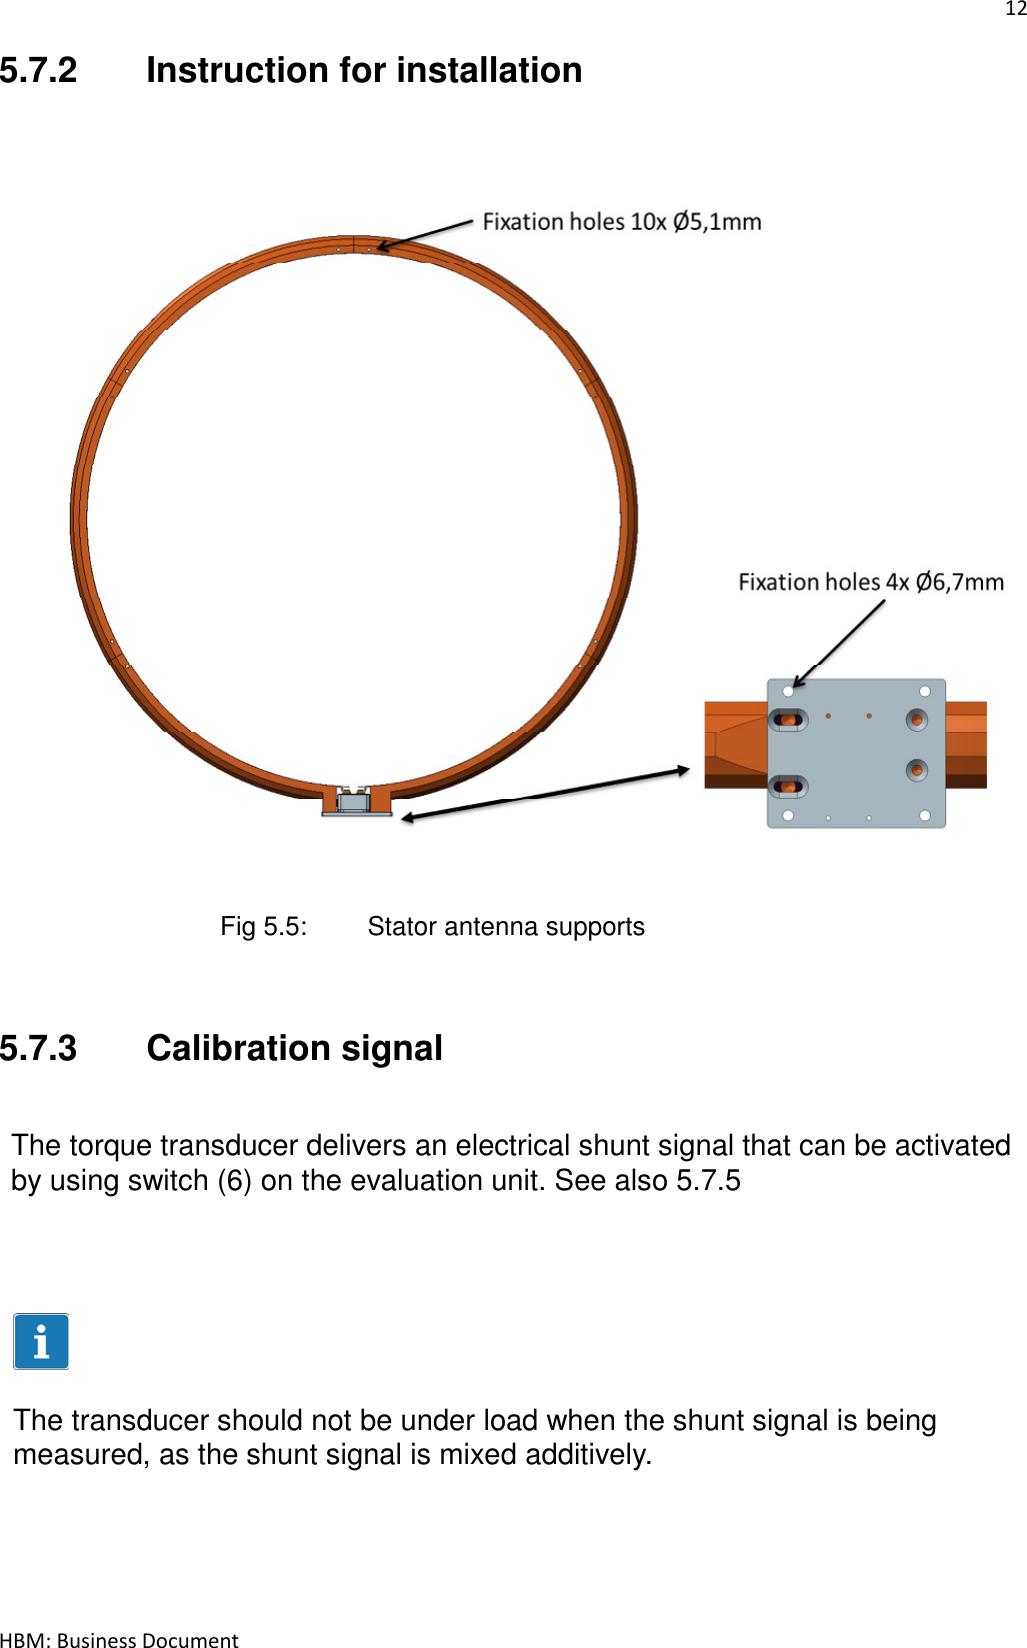 12  HBM: Business Document 5.7.2  Instruction for installation                Fig 5.5:   Stator antenna supports  5.7.3  Calibration signal    The torque transducer delivers an electrical shunt signal that can be activated by using switch (6) on the evaluation unit. See also 5.7.5         The transducer should not be under load when the shunt signal is being measured, as the shunt signal is mixed additively.       